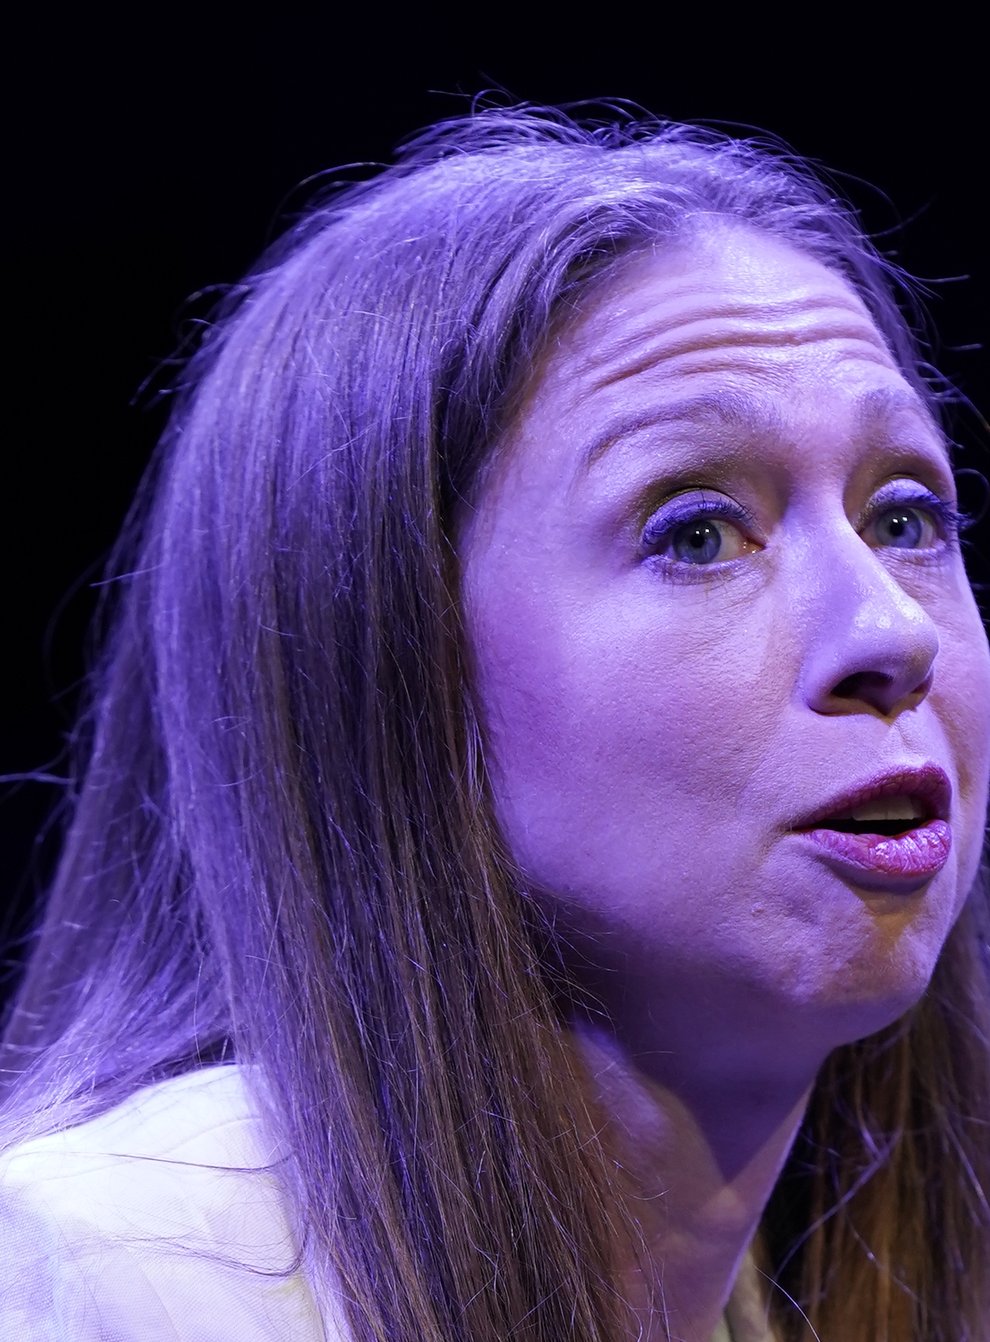 Chelsea Clinton in conversation at the Lyric Theatre in Belfast (Niall Carson/PA)